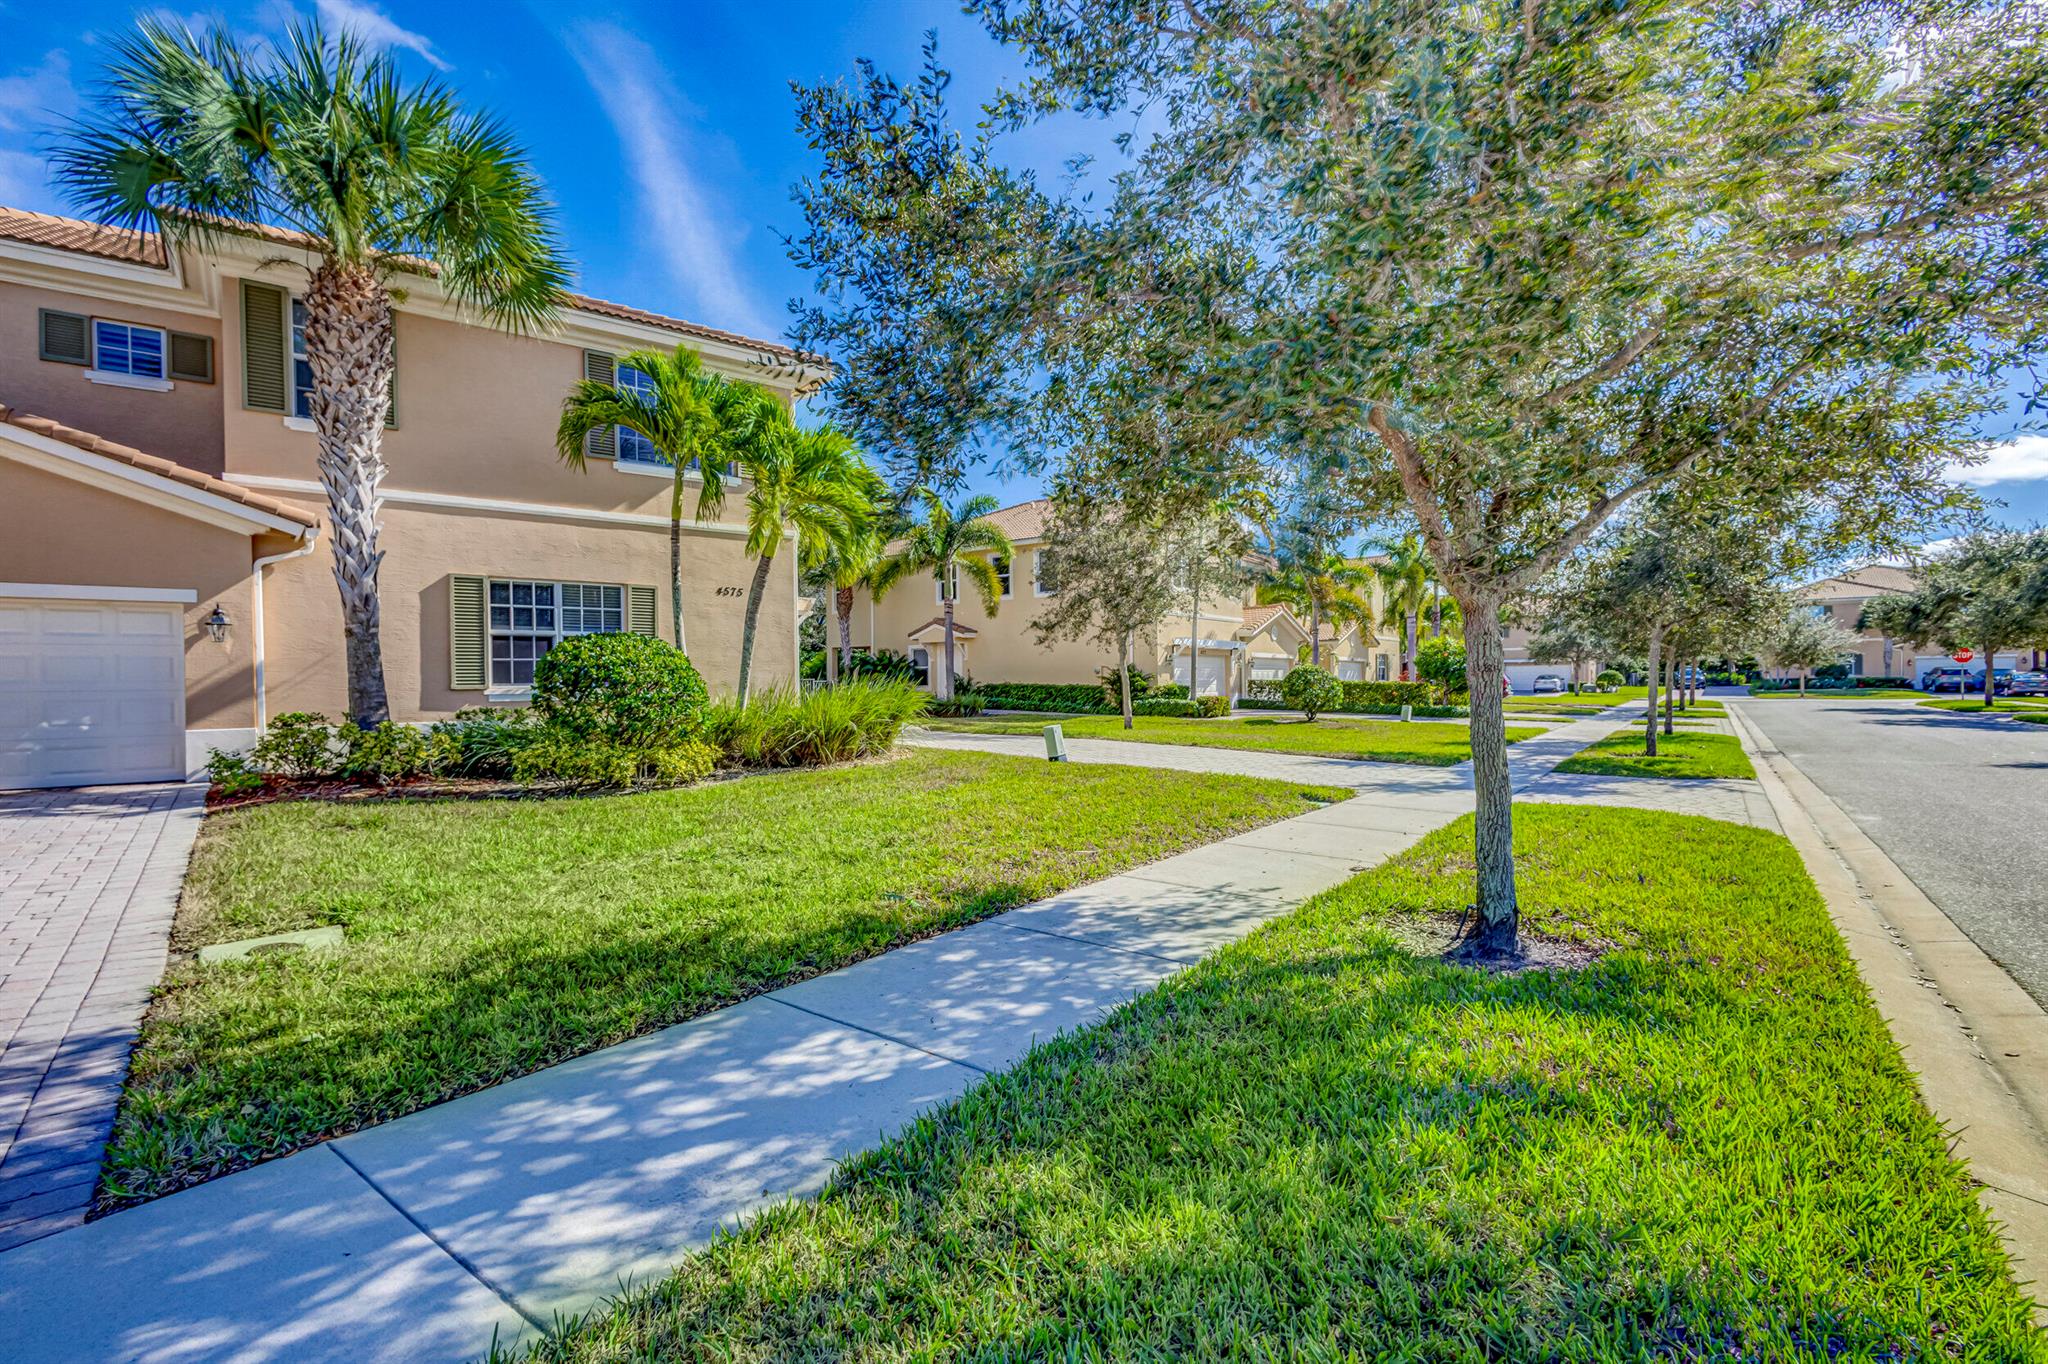 Beautifully kept, upgraded and freshly painted corner unit townhome in the highly desirable Paloma Palm Beach Gardens. Built by Kolter homes this unit has concrete block construction on both levels and hurricane rated impact windows throughout. Upgrades include granite and stainless steel appliances, crown molding and plantation shutters  Large walk in closet with built-ins in the master bedroom and hardwood floors through the upstairs. The large loft can be used for a game room, play room or media room/office. This particular unit has the biggest fenced in back yard in entire development with expanded paver deck. Two car garage and oversized 6 car driveway.